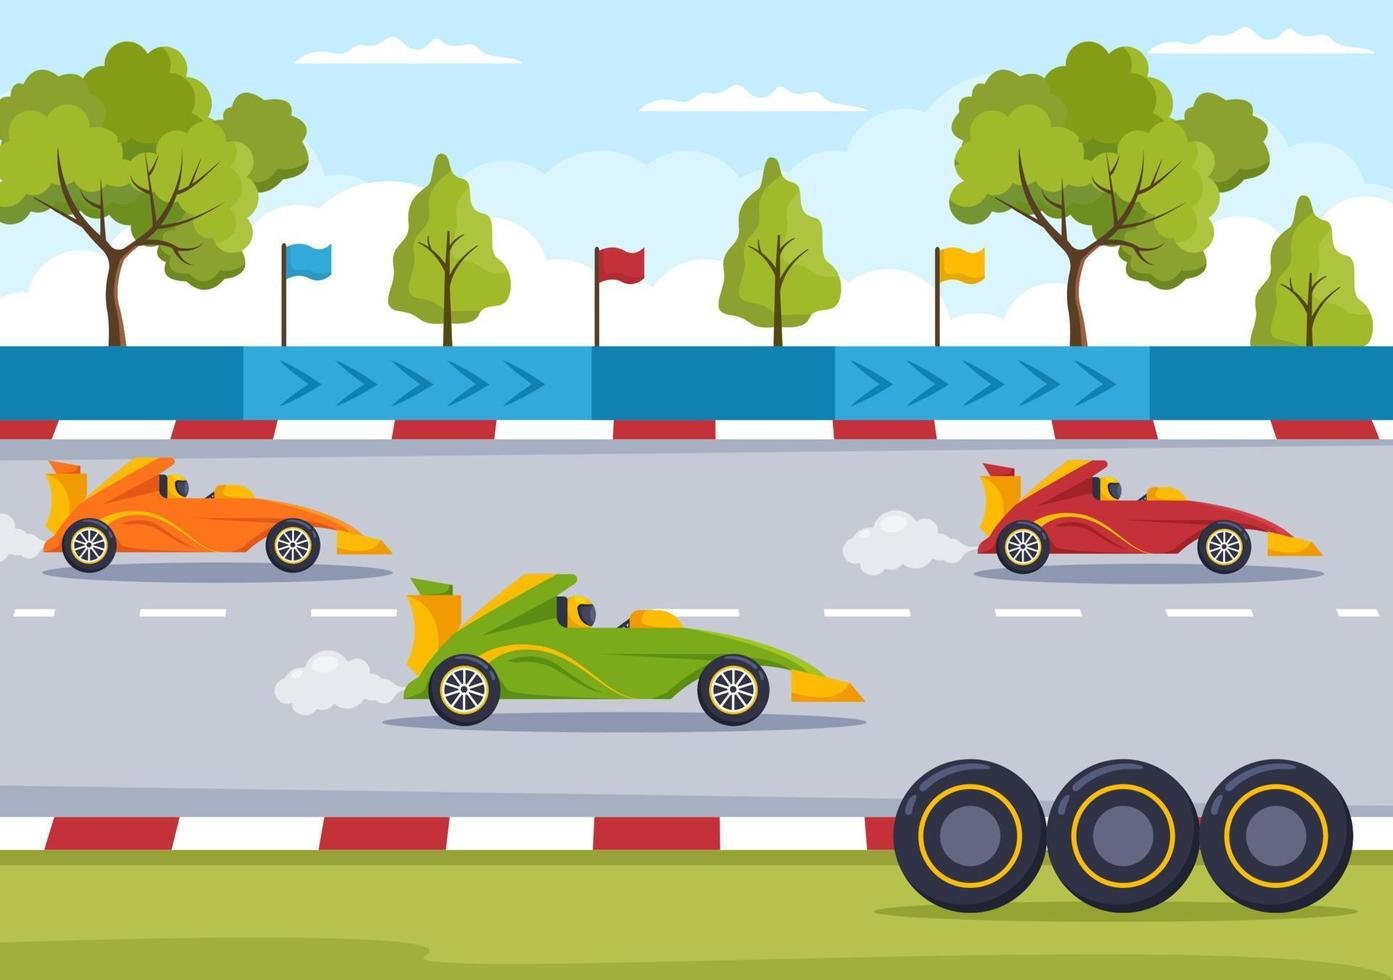 Formula Racing Sport Car Reach on Race Circuit the Finish Line Cartoon Illustration to Win the Championship in Flat Style Design vector